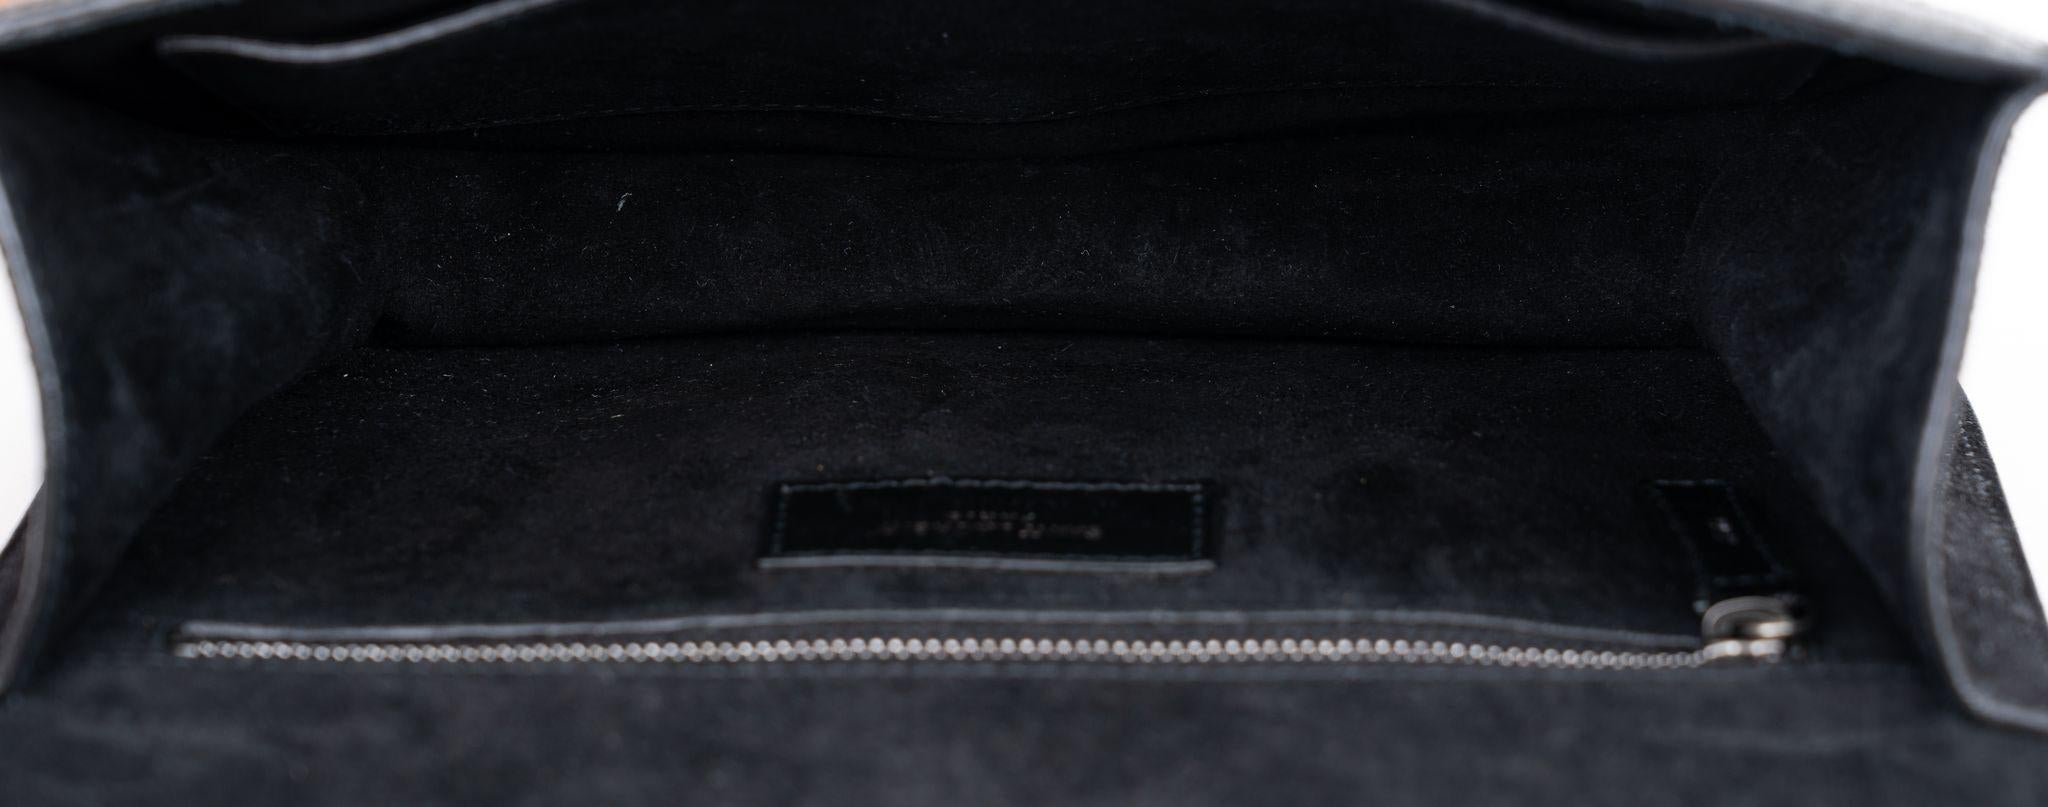 YSL New Black Suede Cross Body Bag For Sale 4